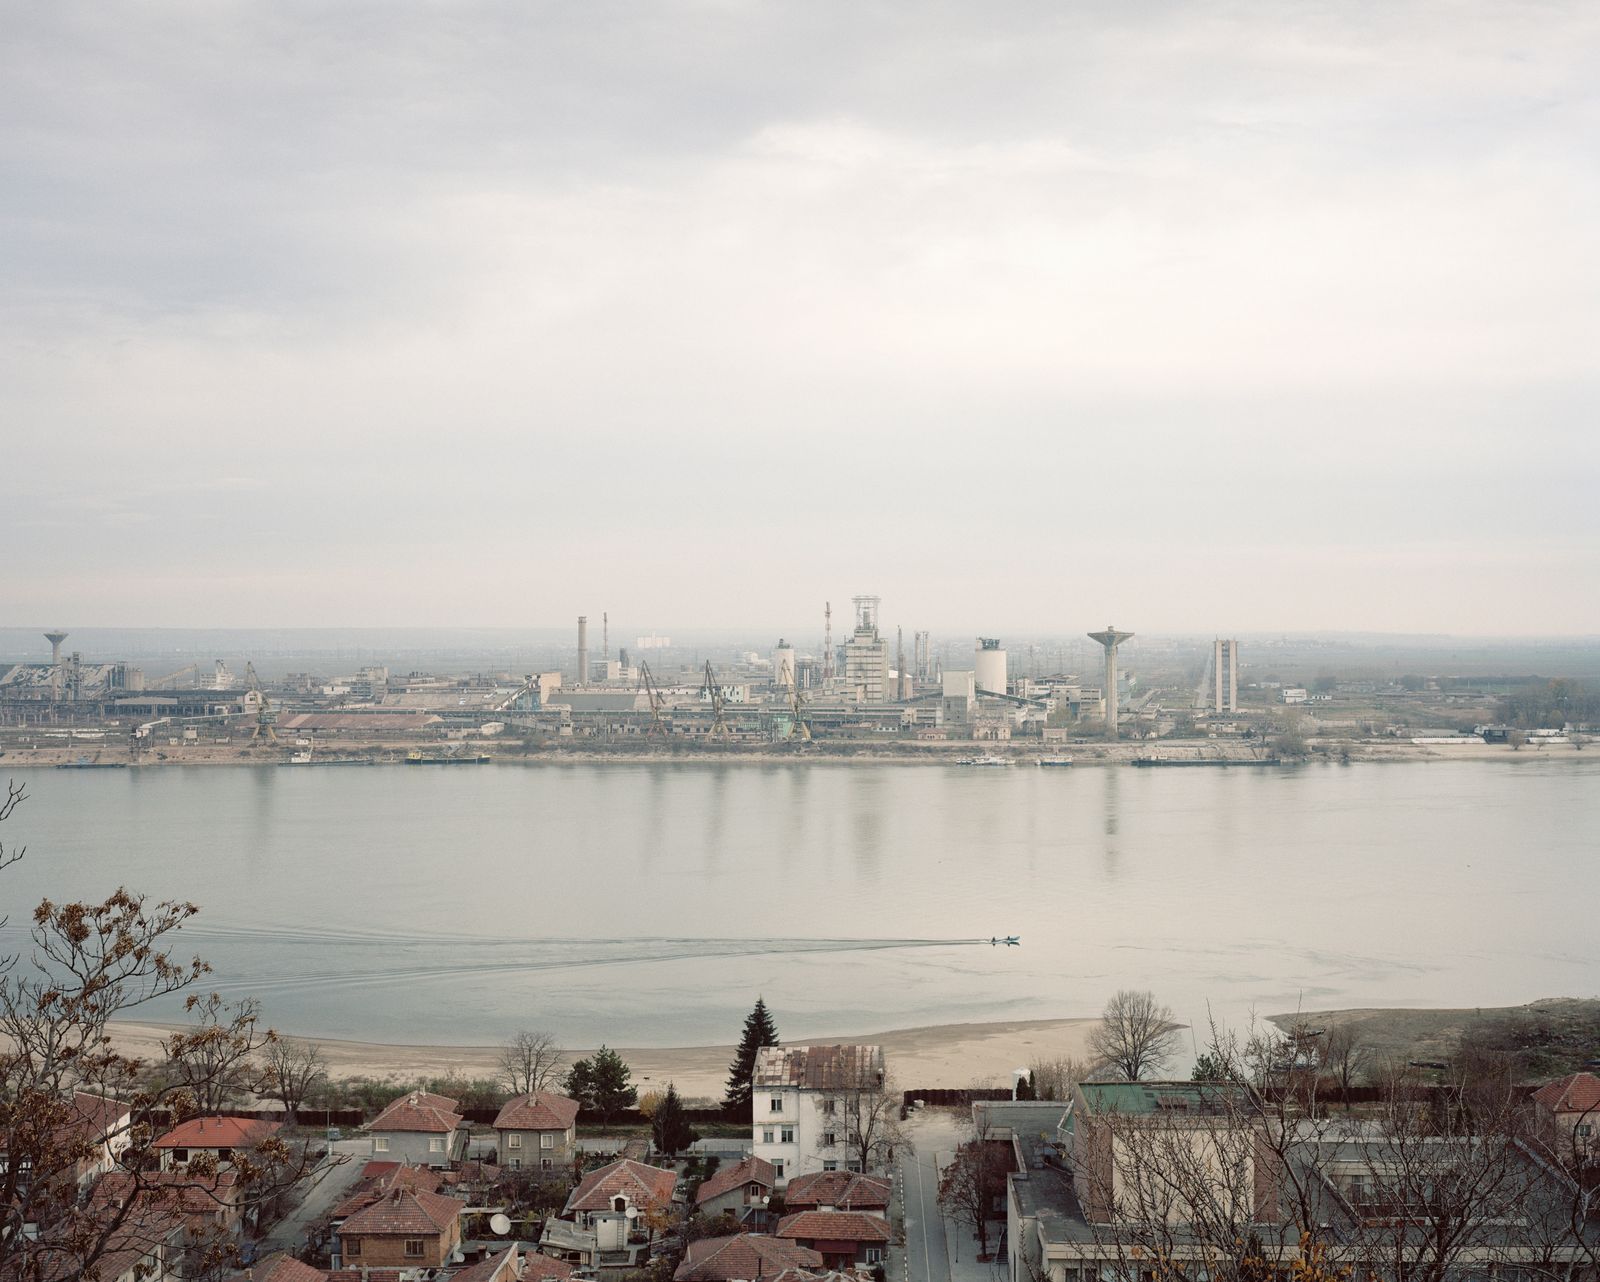 © Tommaso Rada - Image from the Domestic Borders of Europe photography project